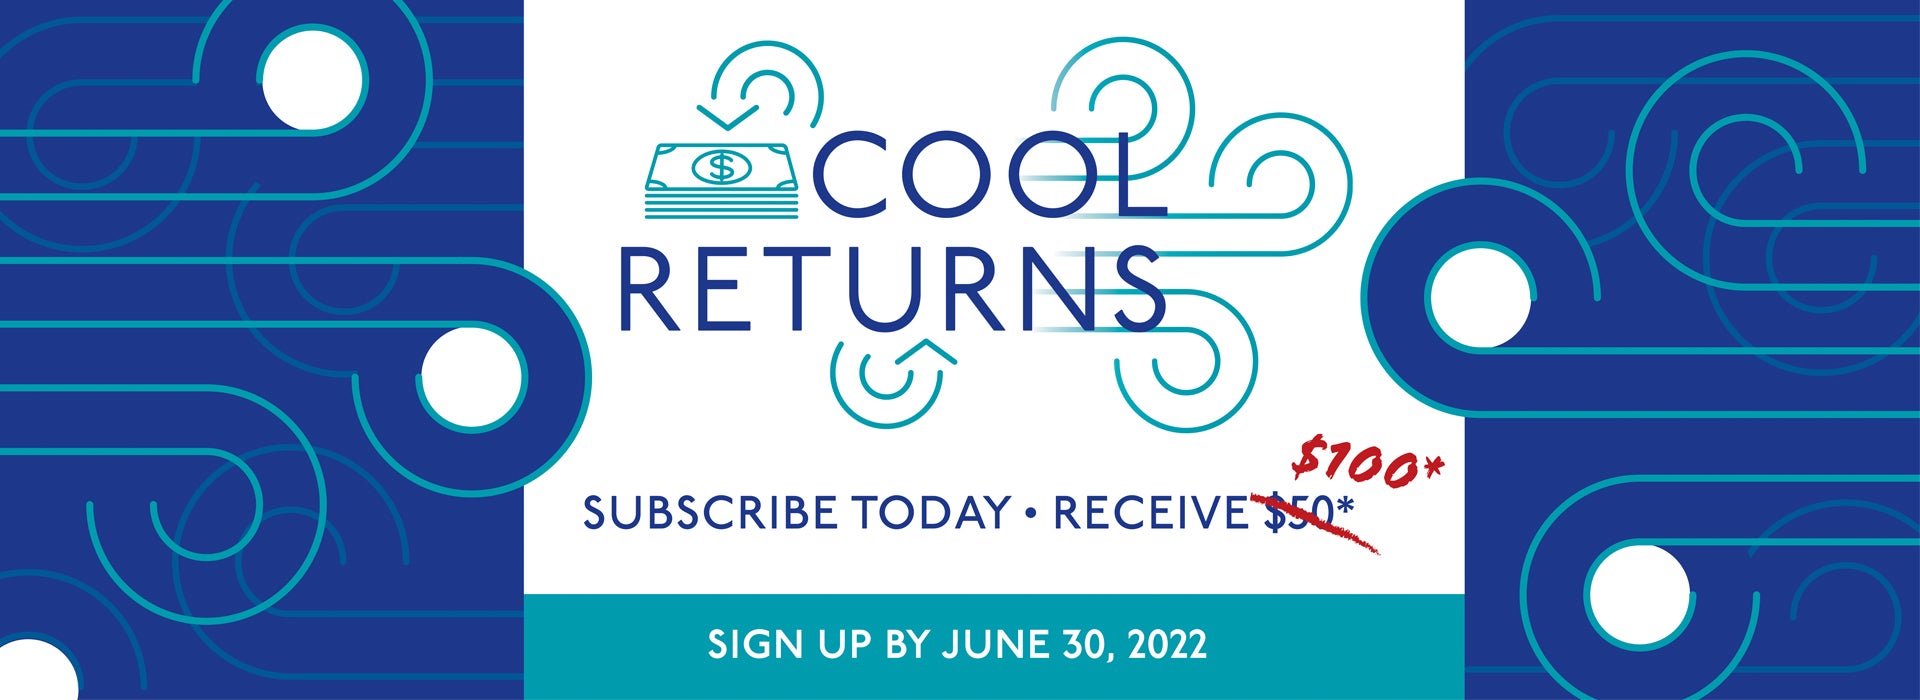 Get $100 with Cool Returns